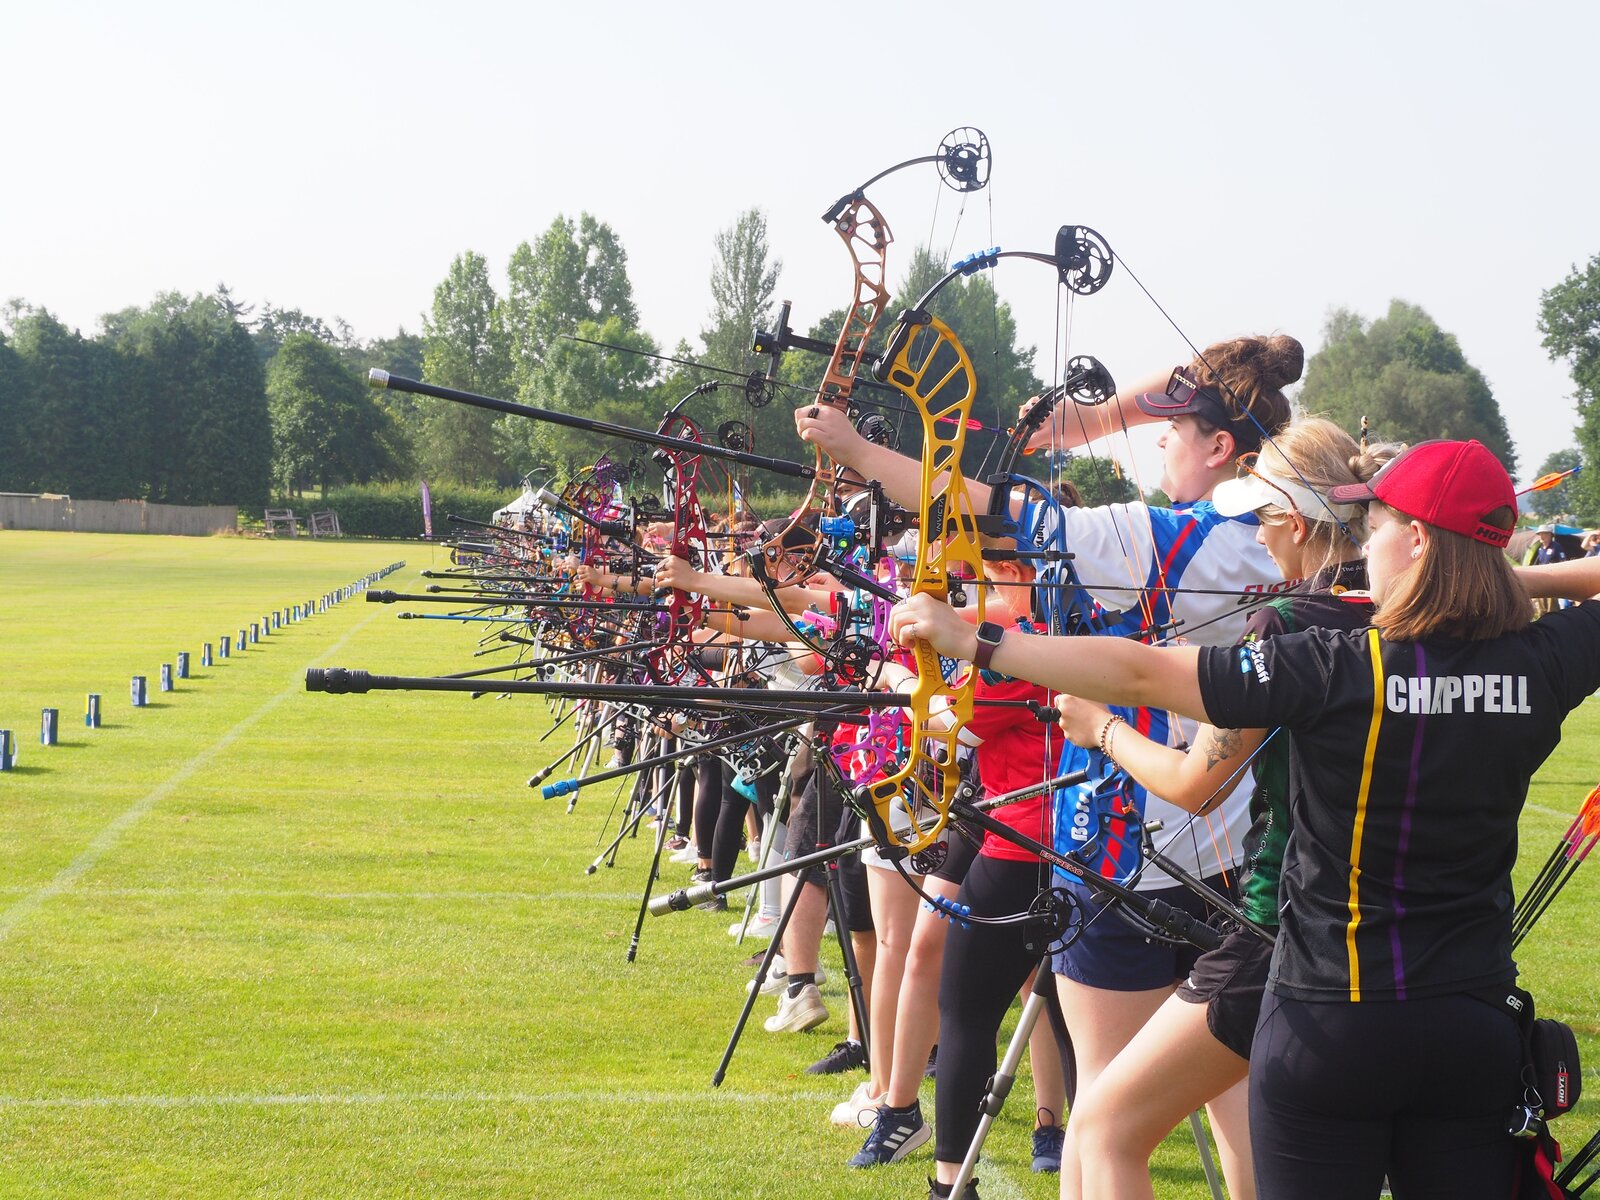 How to prepare for your first archery competition